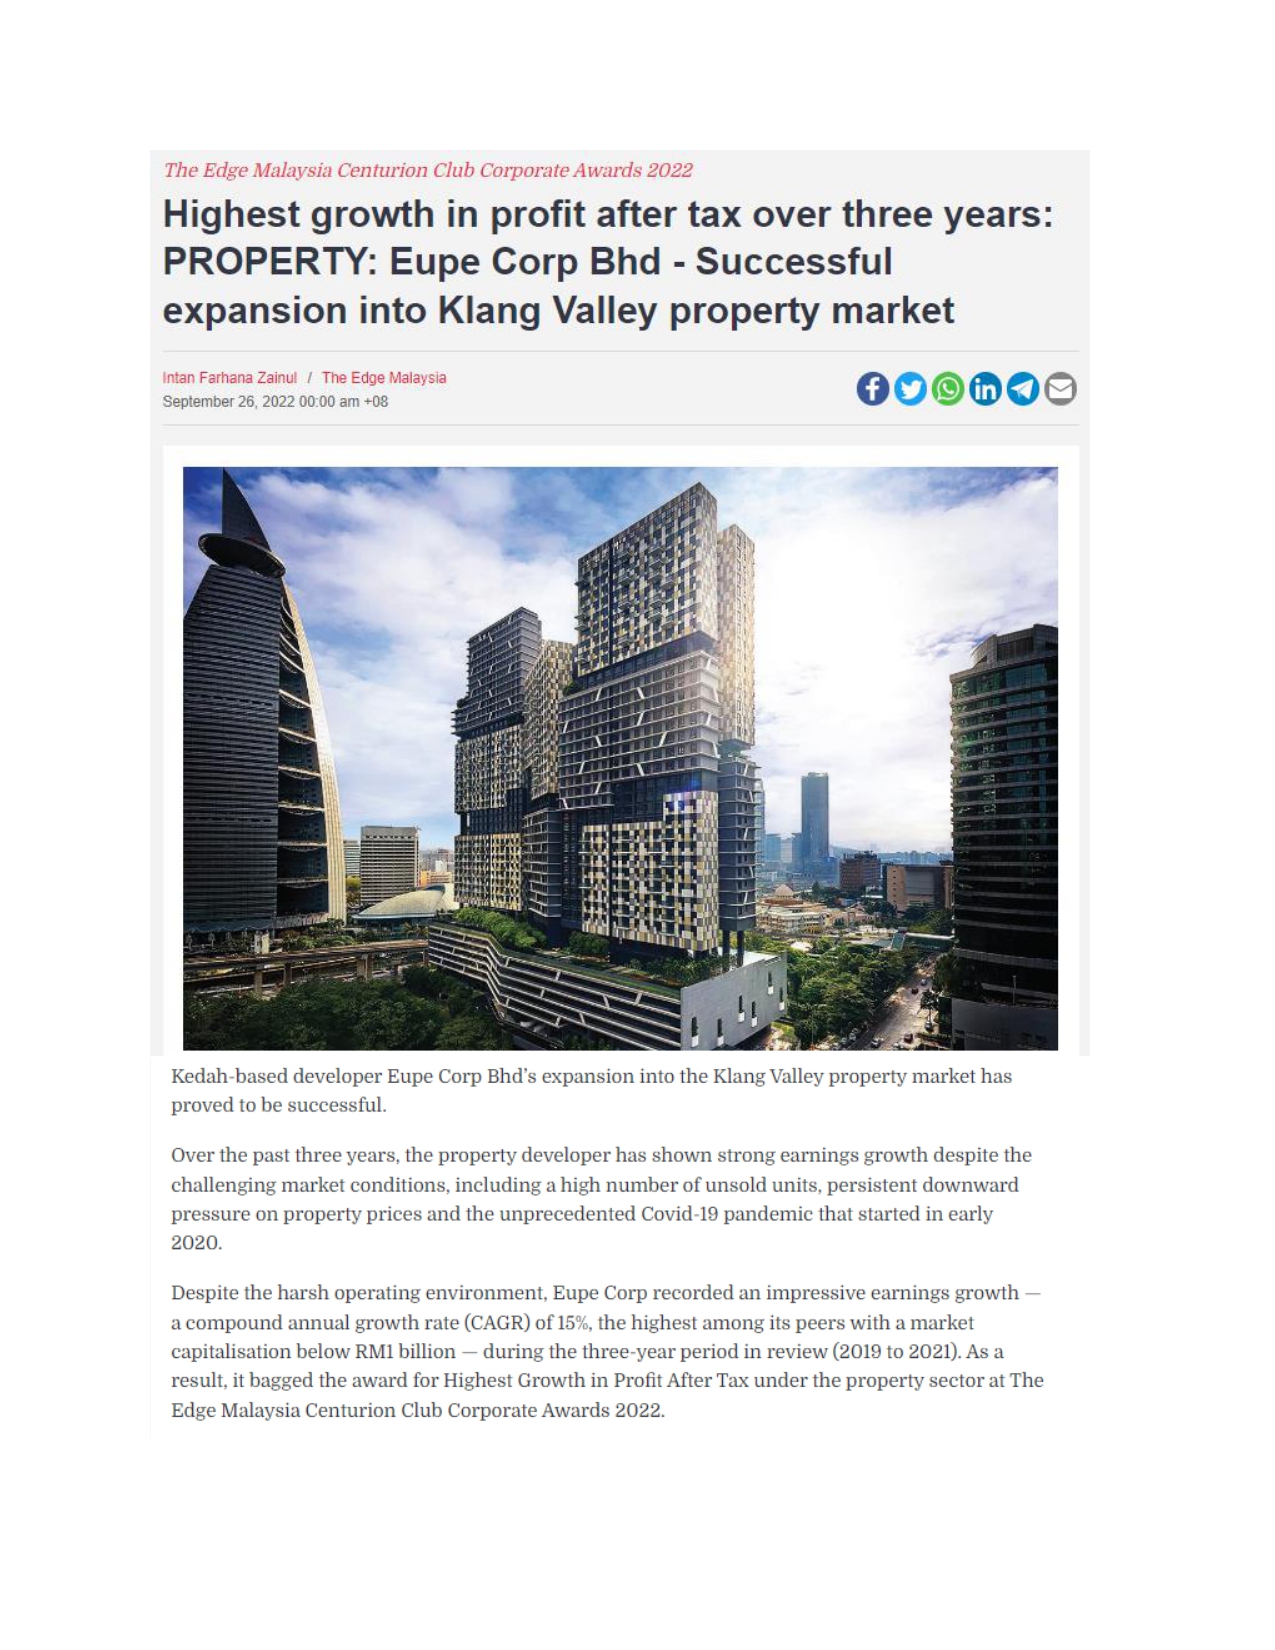 The Edge : Highest growth in profit after tax over three years: PROPERTY: Eupe Corp Bhd - Successful expansion into Klang Valley property market